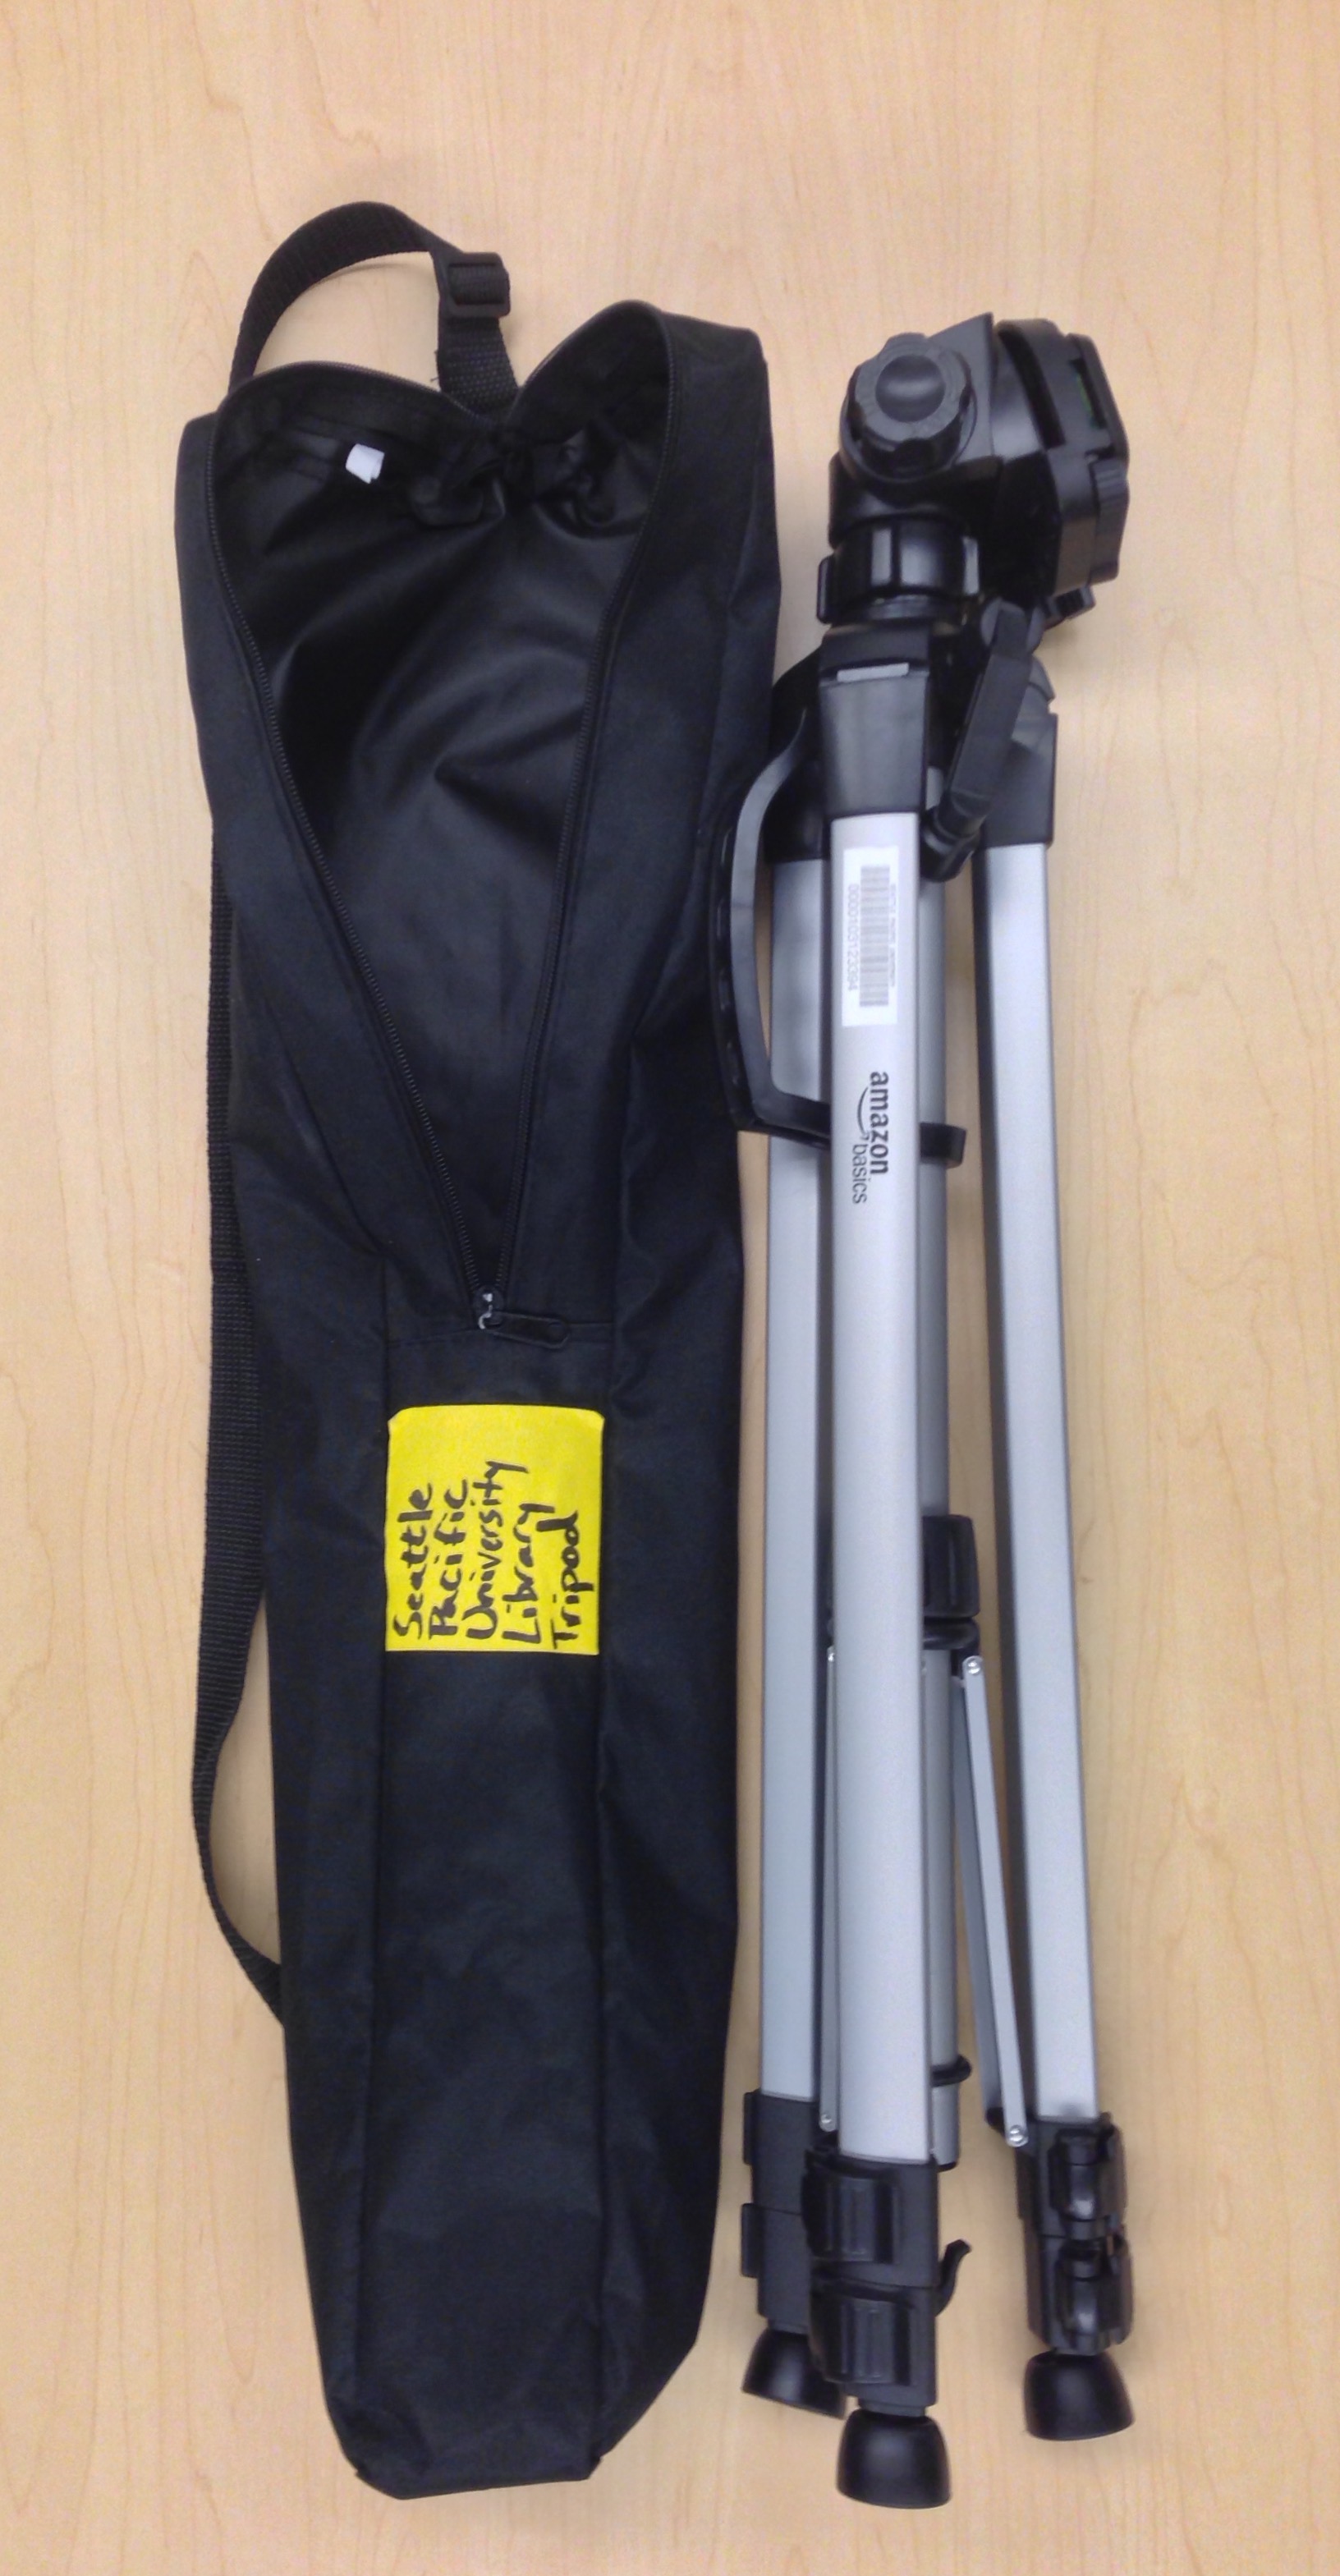 Large tripod and case